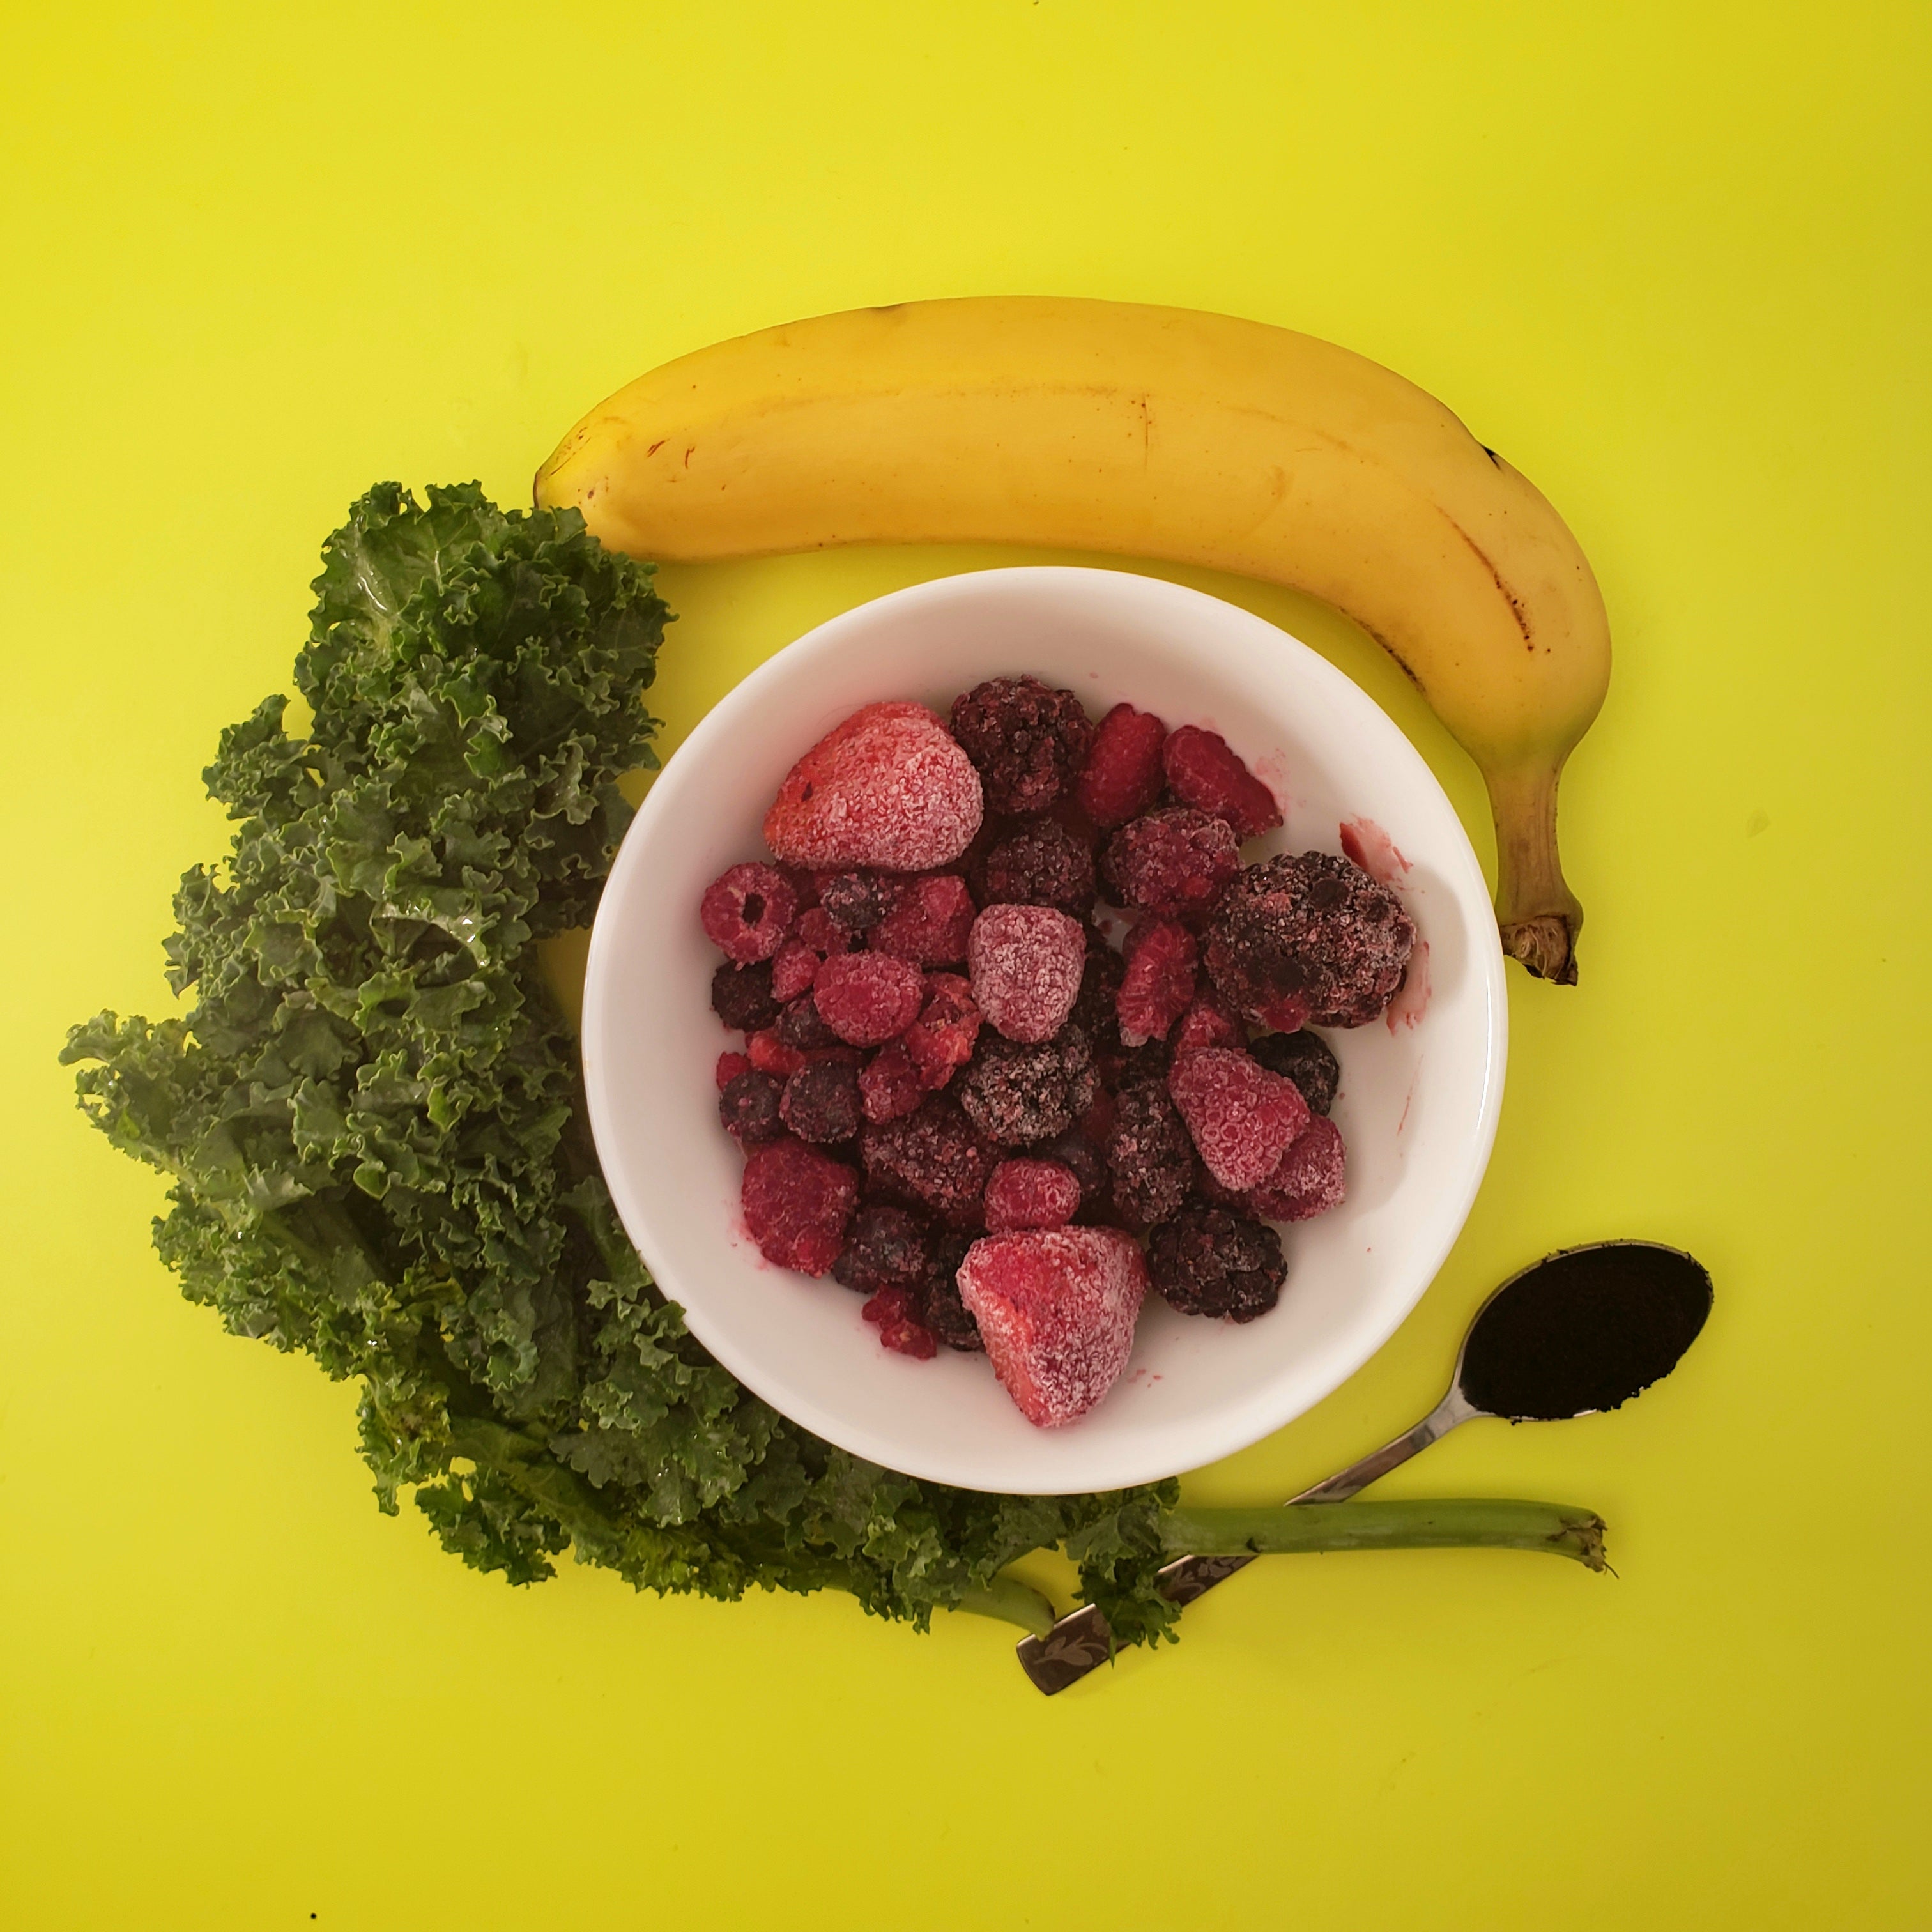 Smoov berry exotic blend, 1 cup kale, 1 cup mixed berries, 1 banana